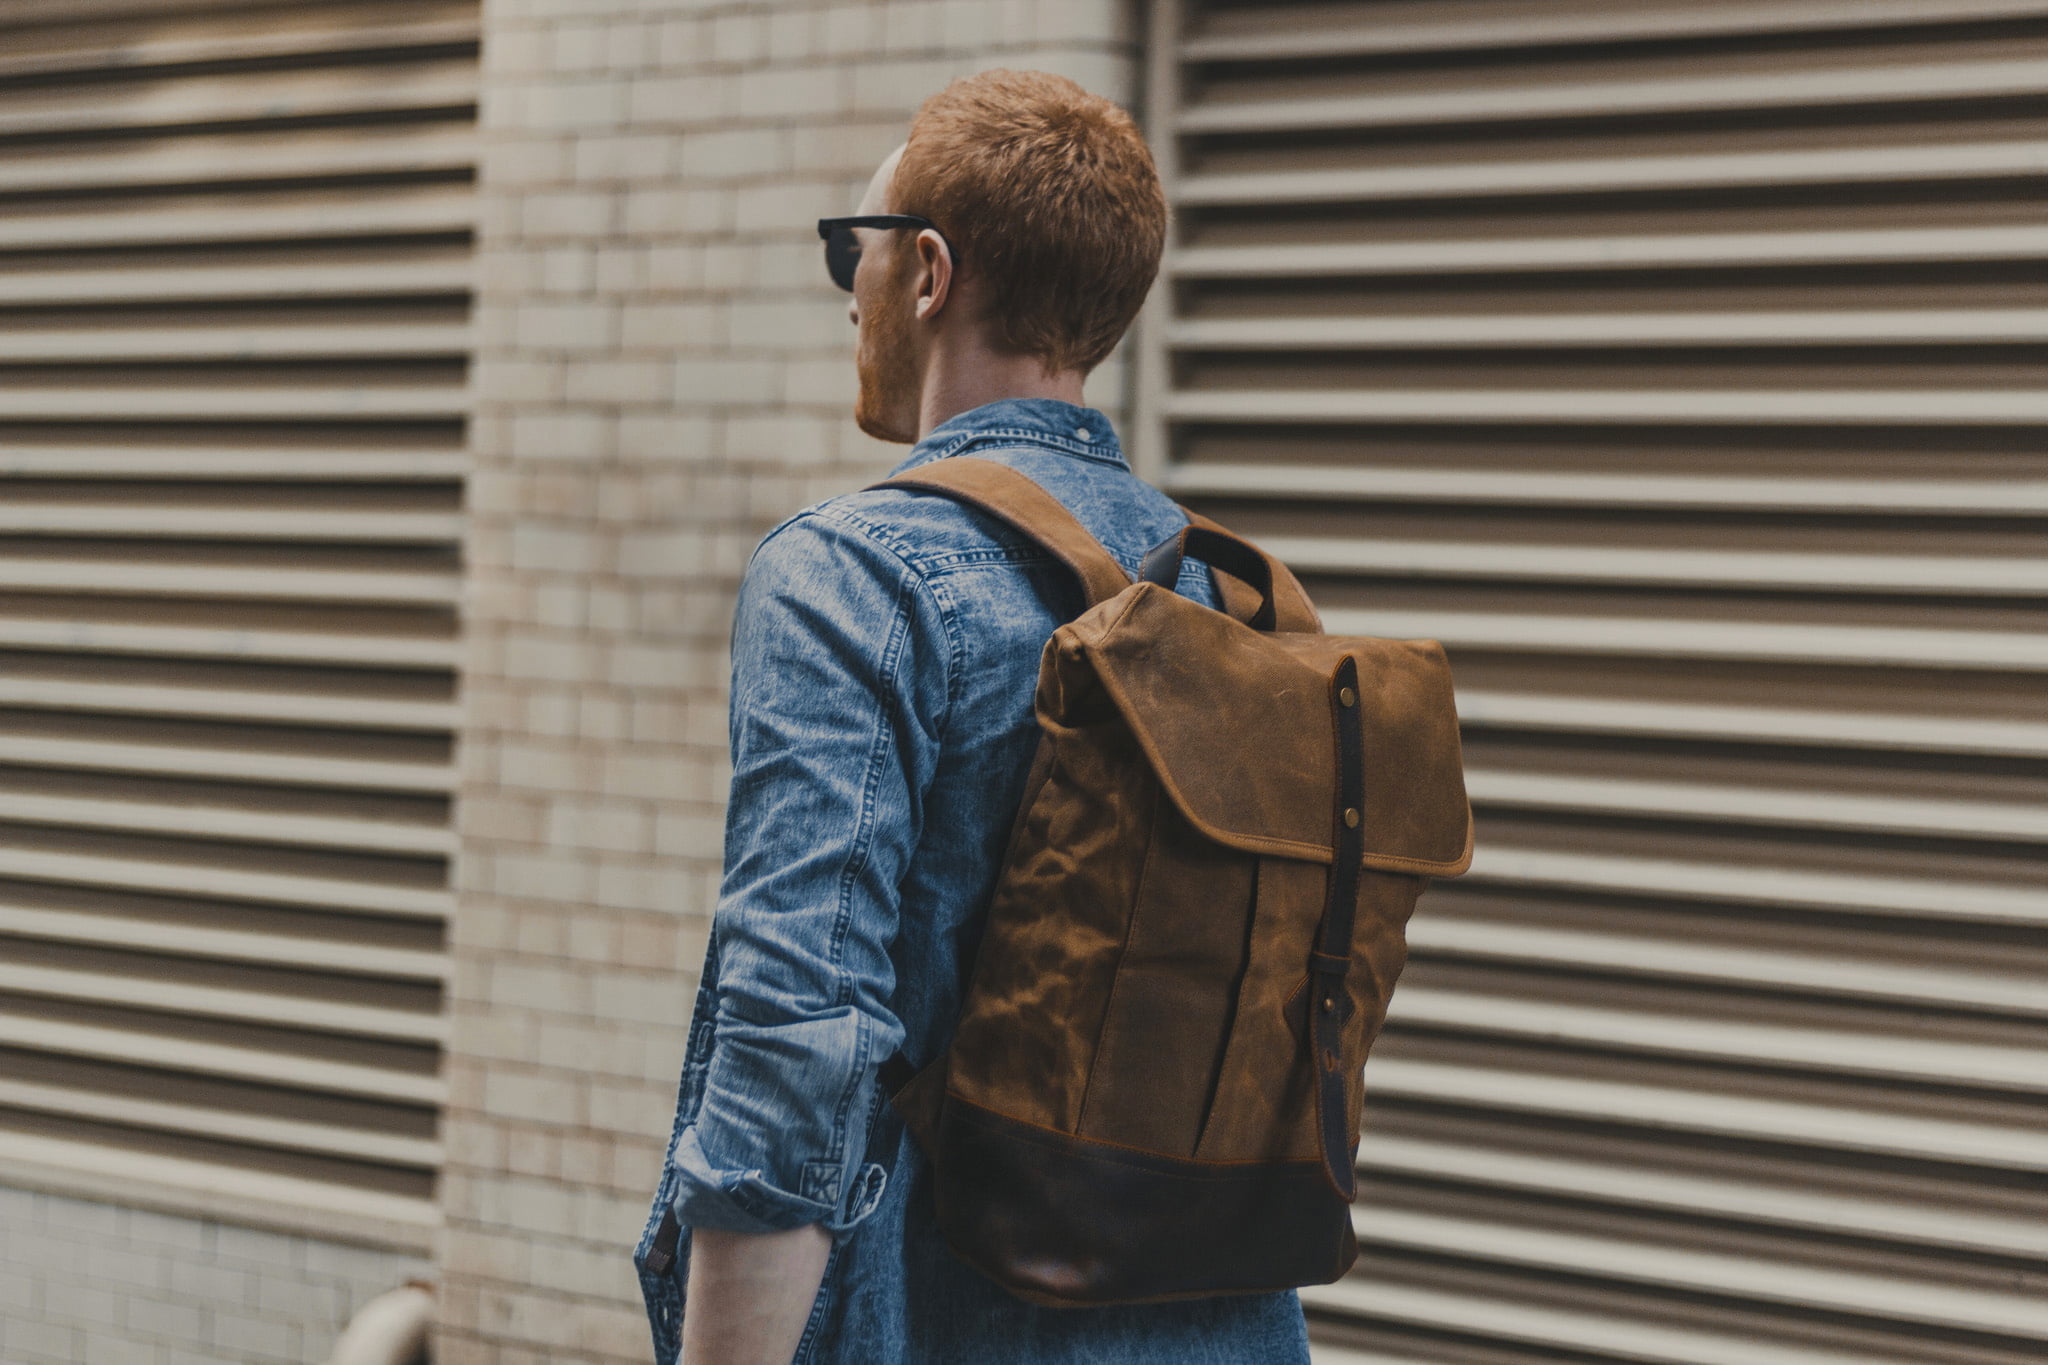 Rugged Vintage-Style Graphite Canvas & Leather Backpack, In stock!